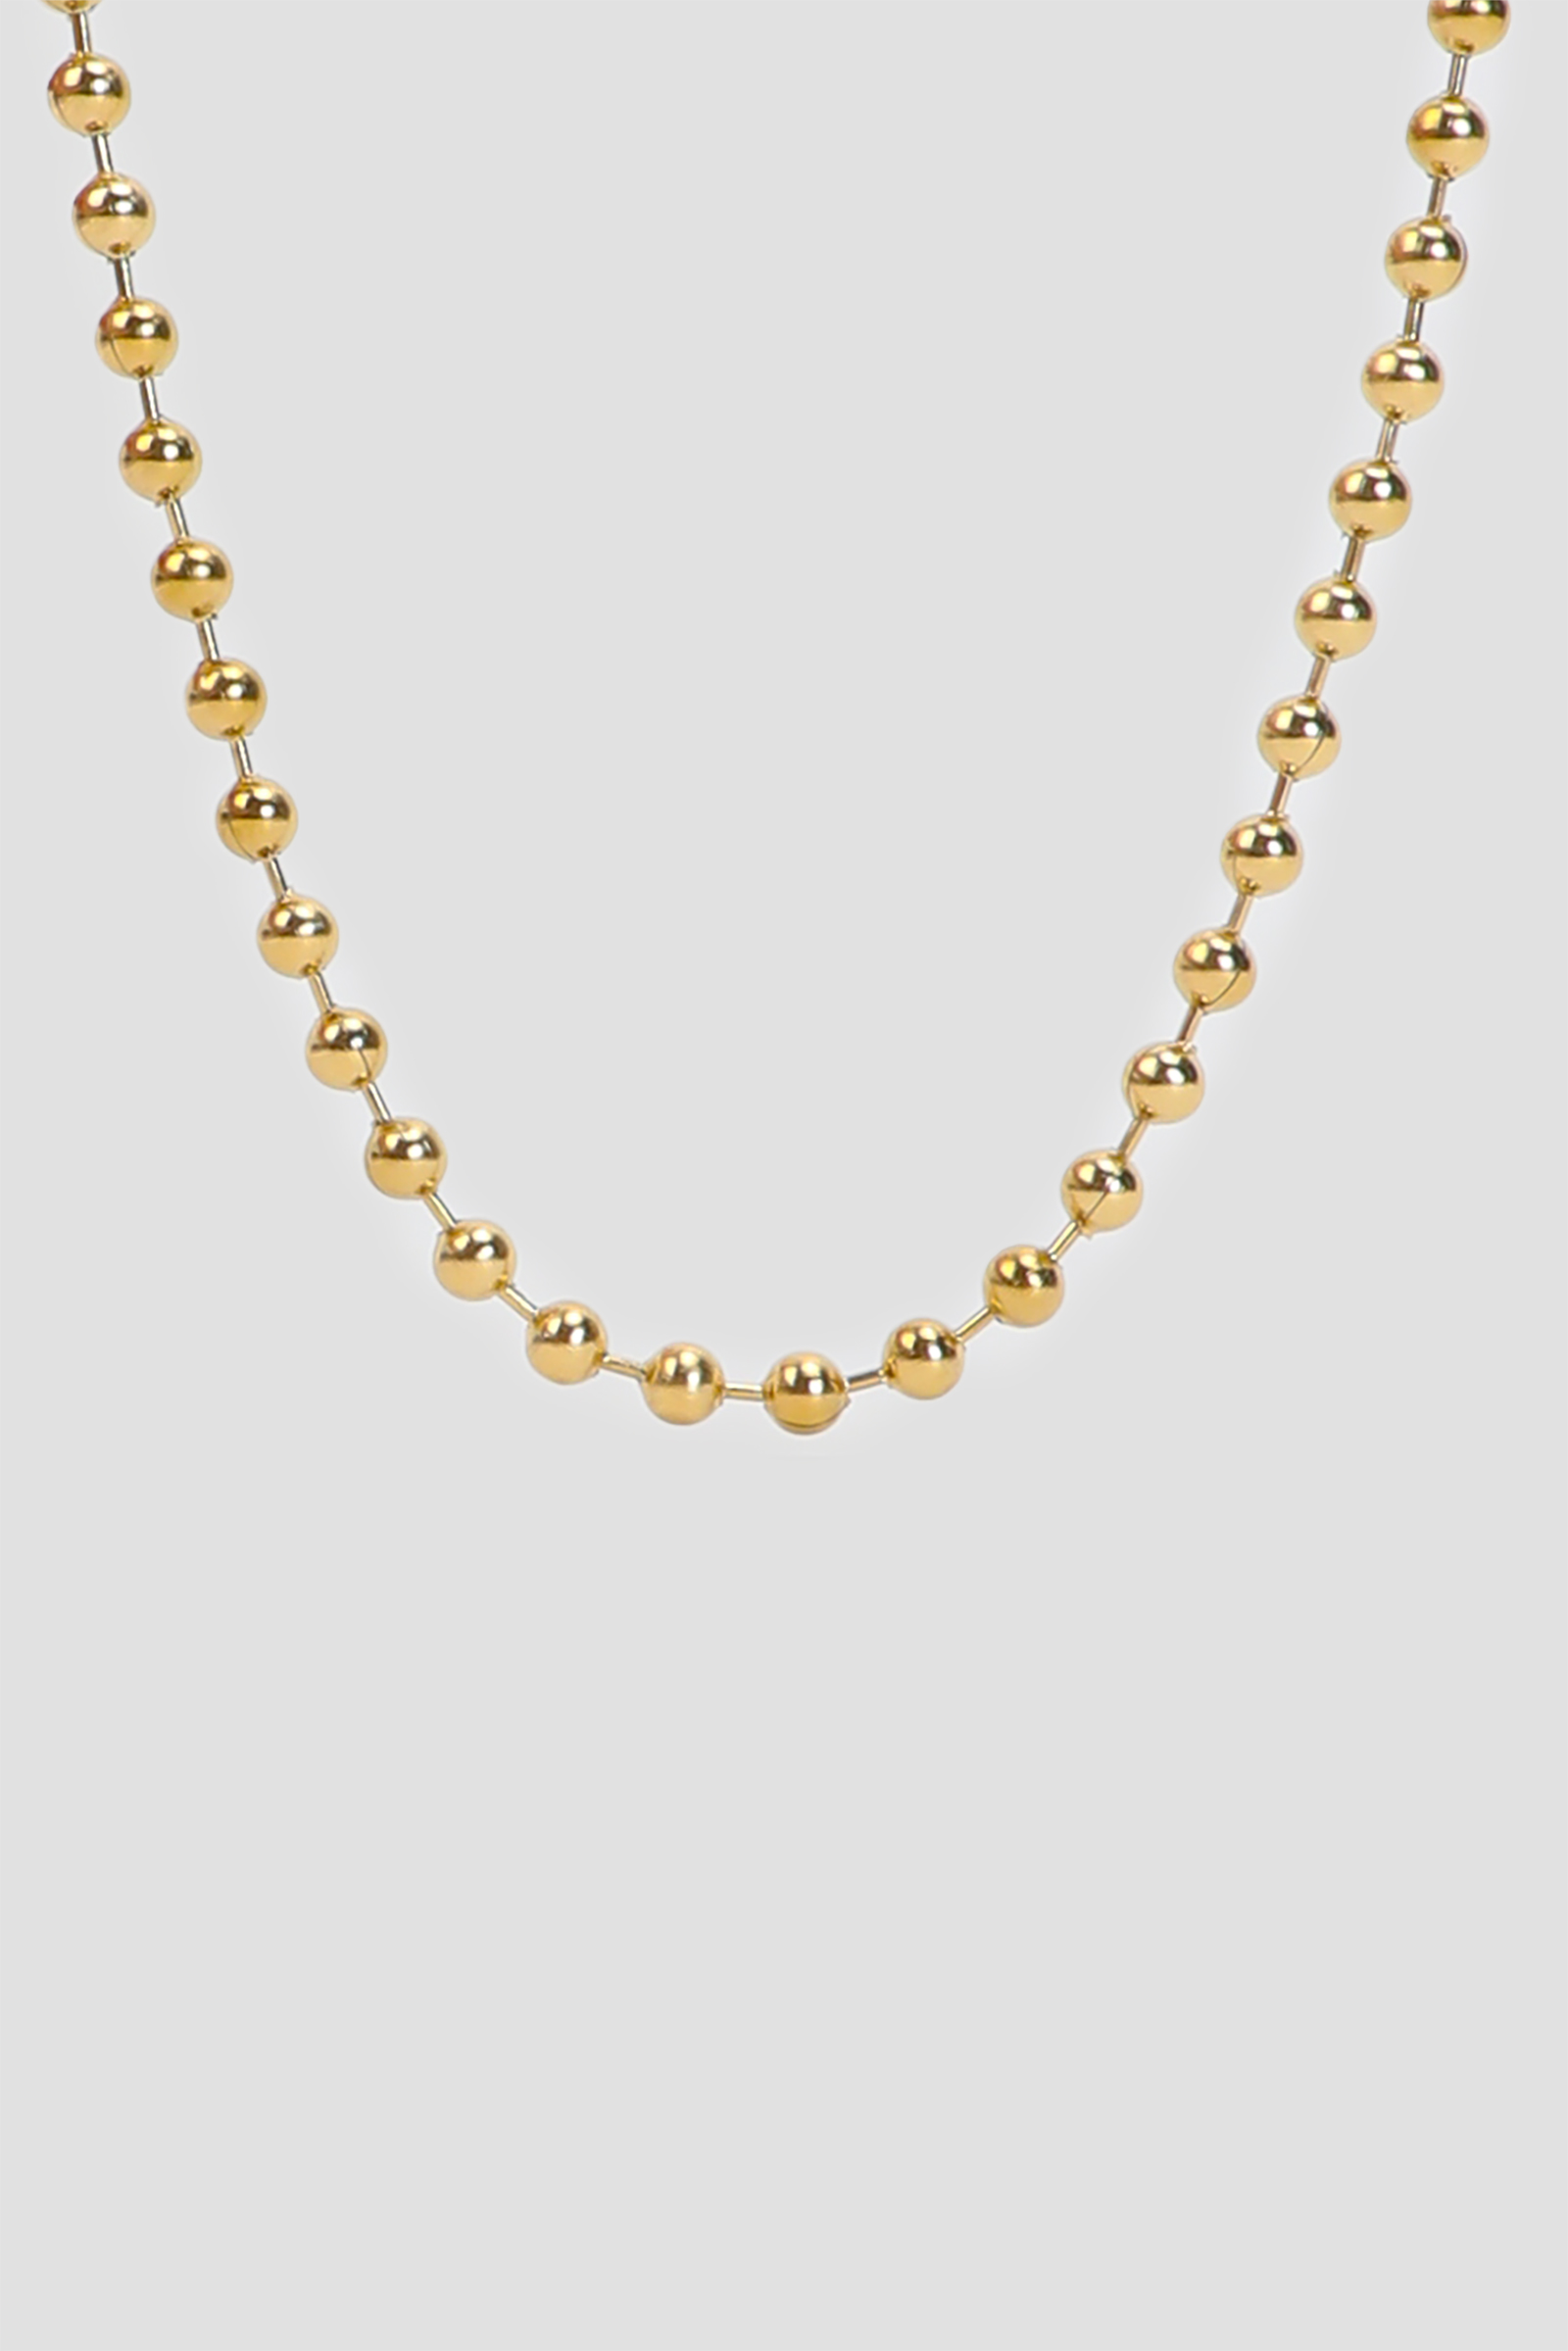 Ardene Man 14K Gold Plated Ball Chain Necklace For Men | Stainless Steel